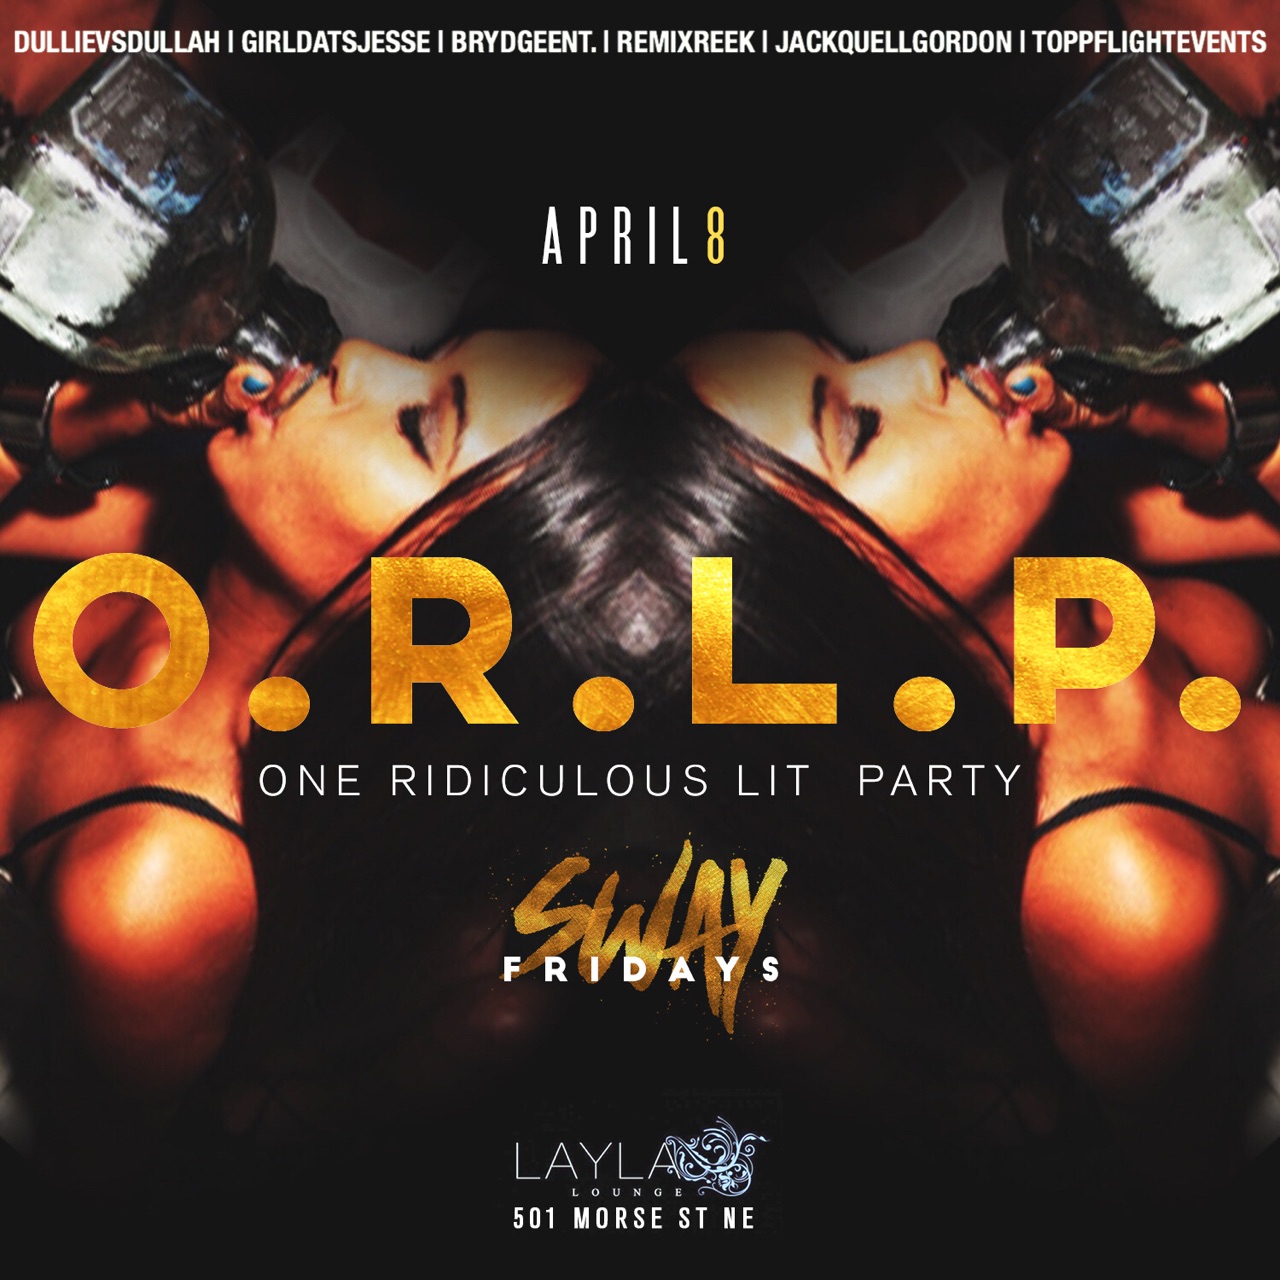 One Ridiculous Lit Party